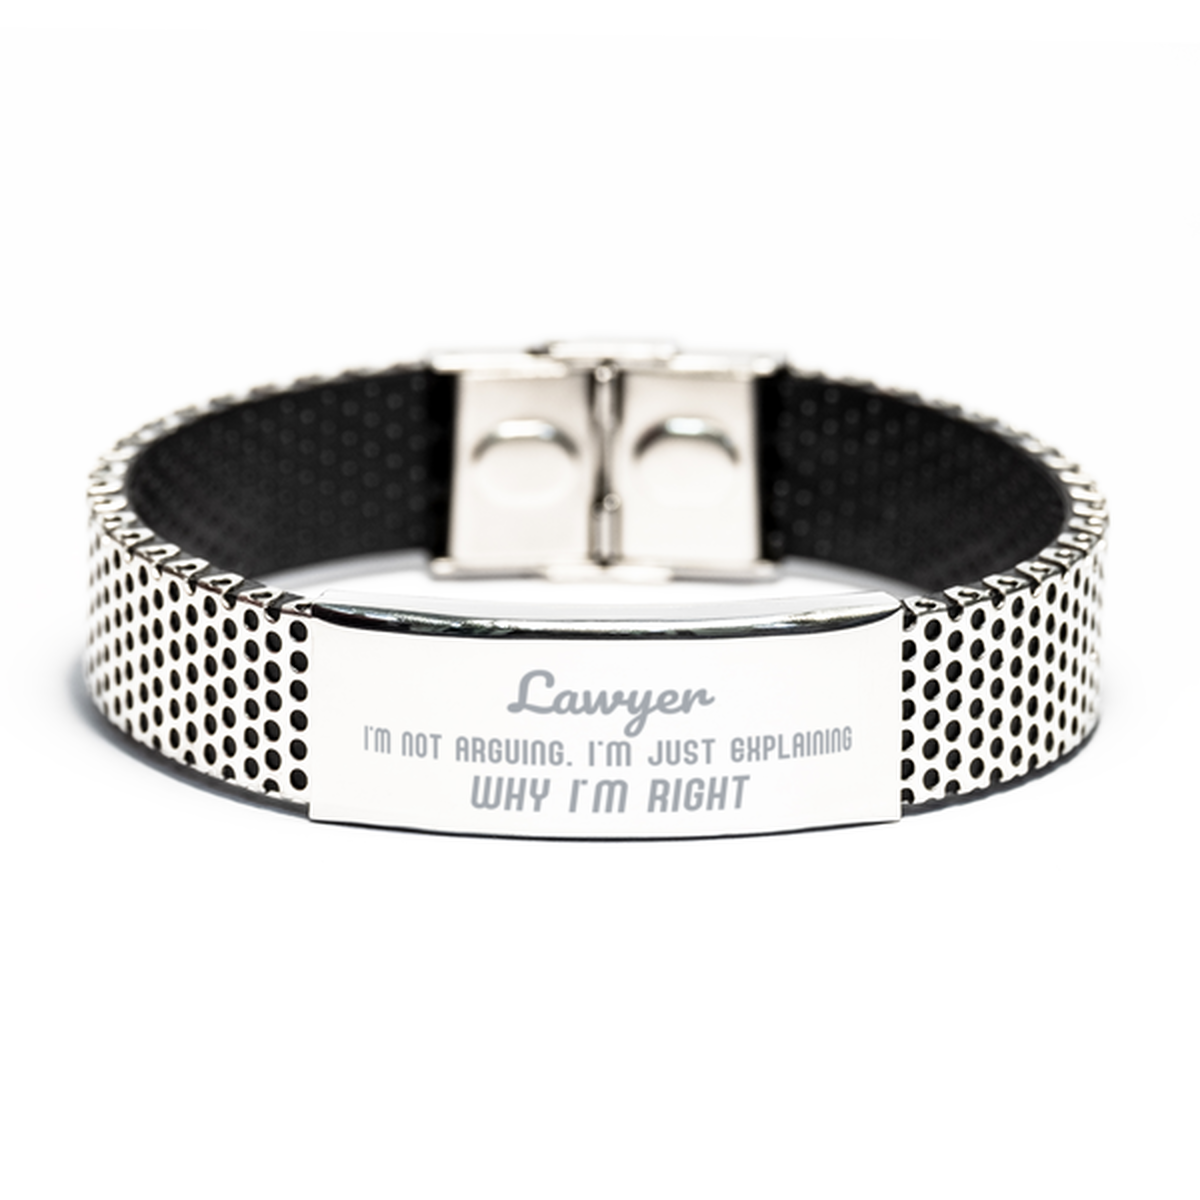 Lawyer I'm not Arguing. I'm Just Explaining Why I'm RIGHT Stainless Steel Bracelet, Funny Saying Quote Lawyer Gifts For Lawyer Graduation Birthday Christmas Gifts for Men Women Coworker